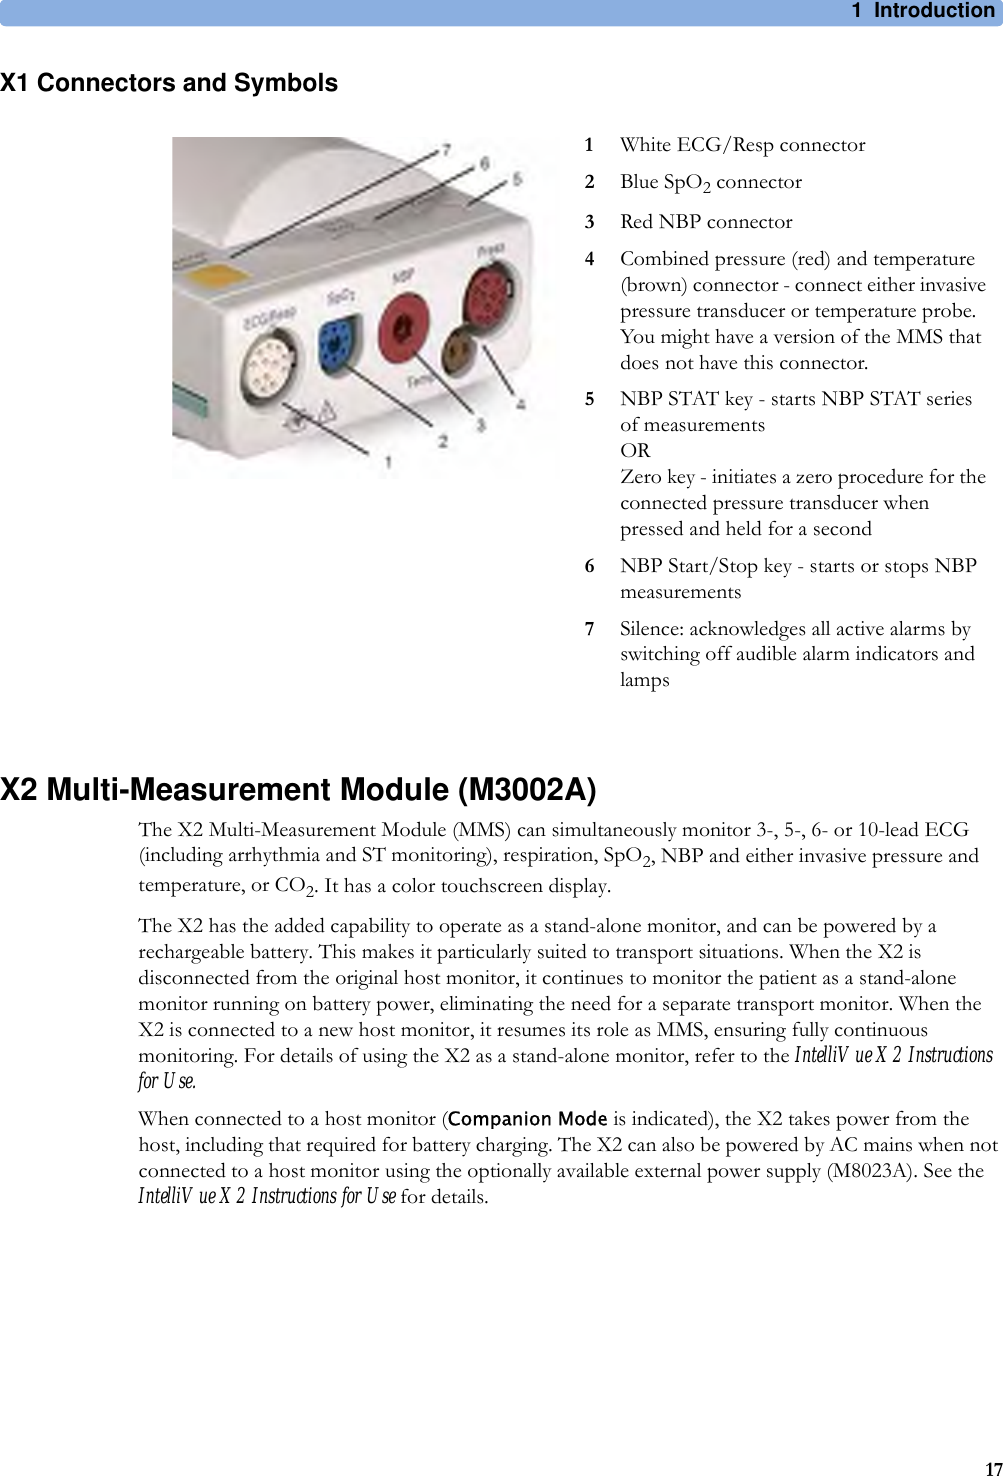 1 Introduction17X1 Connectors and SymbolsX2 Multi-Measurement Module (M3002A)The X2 Multi-Measurement Module (MMS) can simultaneously monitor 3-, 5-, 6- or 10-lead ECG (including arrhythmia and ST monitoring), respiration, SpO2, NBP and either invasive pressure and temperature, or CO2. It has a color touchscreen display.The X2 has the added capability to operate as a stand-alone monitor, and can be powered by a rechargeable battery. This makes it particularly suited to transport situations. When the X2 is disconnected from the original host monitor, it continues to monitor the patient as a stand-alone monitor running on battery power, eliminating the need for a separate transport monitor. When the X2 is connected to a new host monitor, it resumes its role as MMS, ensuring fully continuous monitoring. For details of using the X2 as a stand-alone monitor, refer to the IntelliVue X2 Instructions for Use.When connected to a host monitor (Companion Mode is indicated), the X2 takes power from the host, including that required for battery charging. The X2 can also be powered by AC mains when not connected to a host monitor using the optionally available external power supply (M8023A). See the IntelliVue X2 Instructions for Use for details.1White ECG/Resp connector2Blue SpO2 connector3Red NBP connector4Combined pressure (red) and temperature (brown) connector - connect either invasive pressure transducer or temperature probe. You might have a version of the MMS that does not have this connector.5NBP STAT key - starts NBP STAT series of measurementsORZero key - initiates a zero procedure for the connected pressure transducer when pressed and held for a second6NBP Start/Stop key - starts or stops NBP measurements7Silence: acknowledges all active alarms by switching off audible alarm indicators and lamps